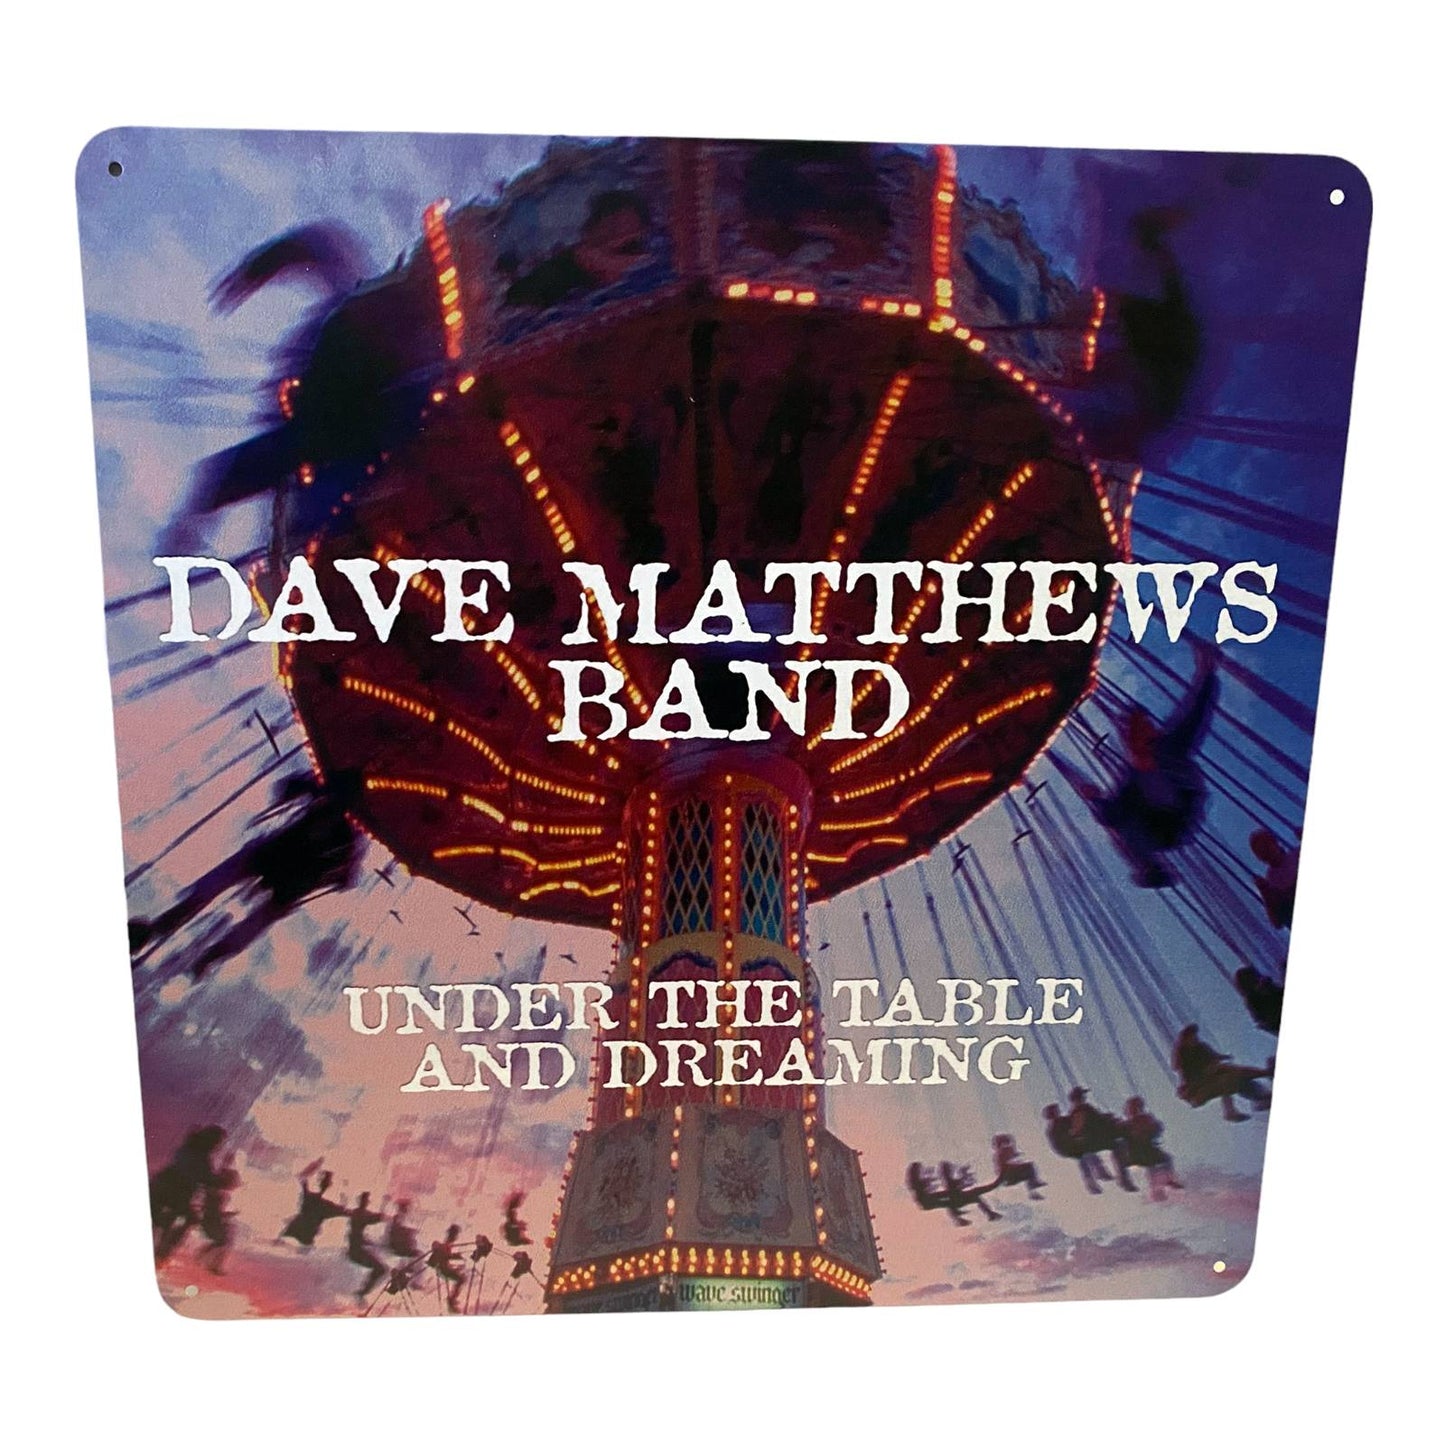 Dave Matthews Band - Under The Table & Dreaming Cover Metal Print Tin Sign 12"x 12"